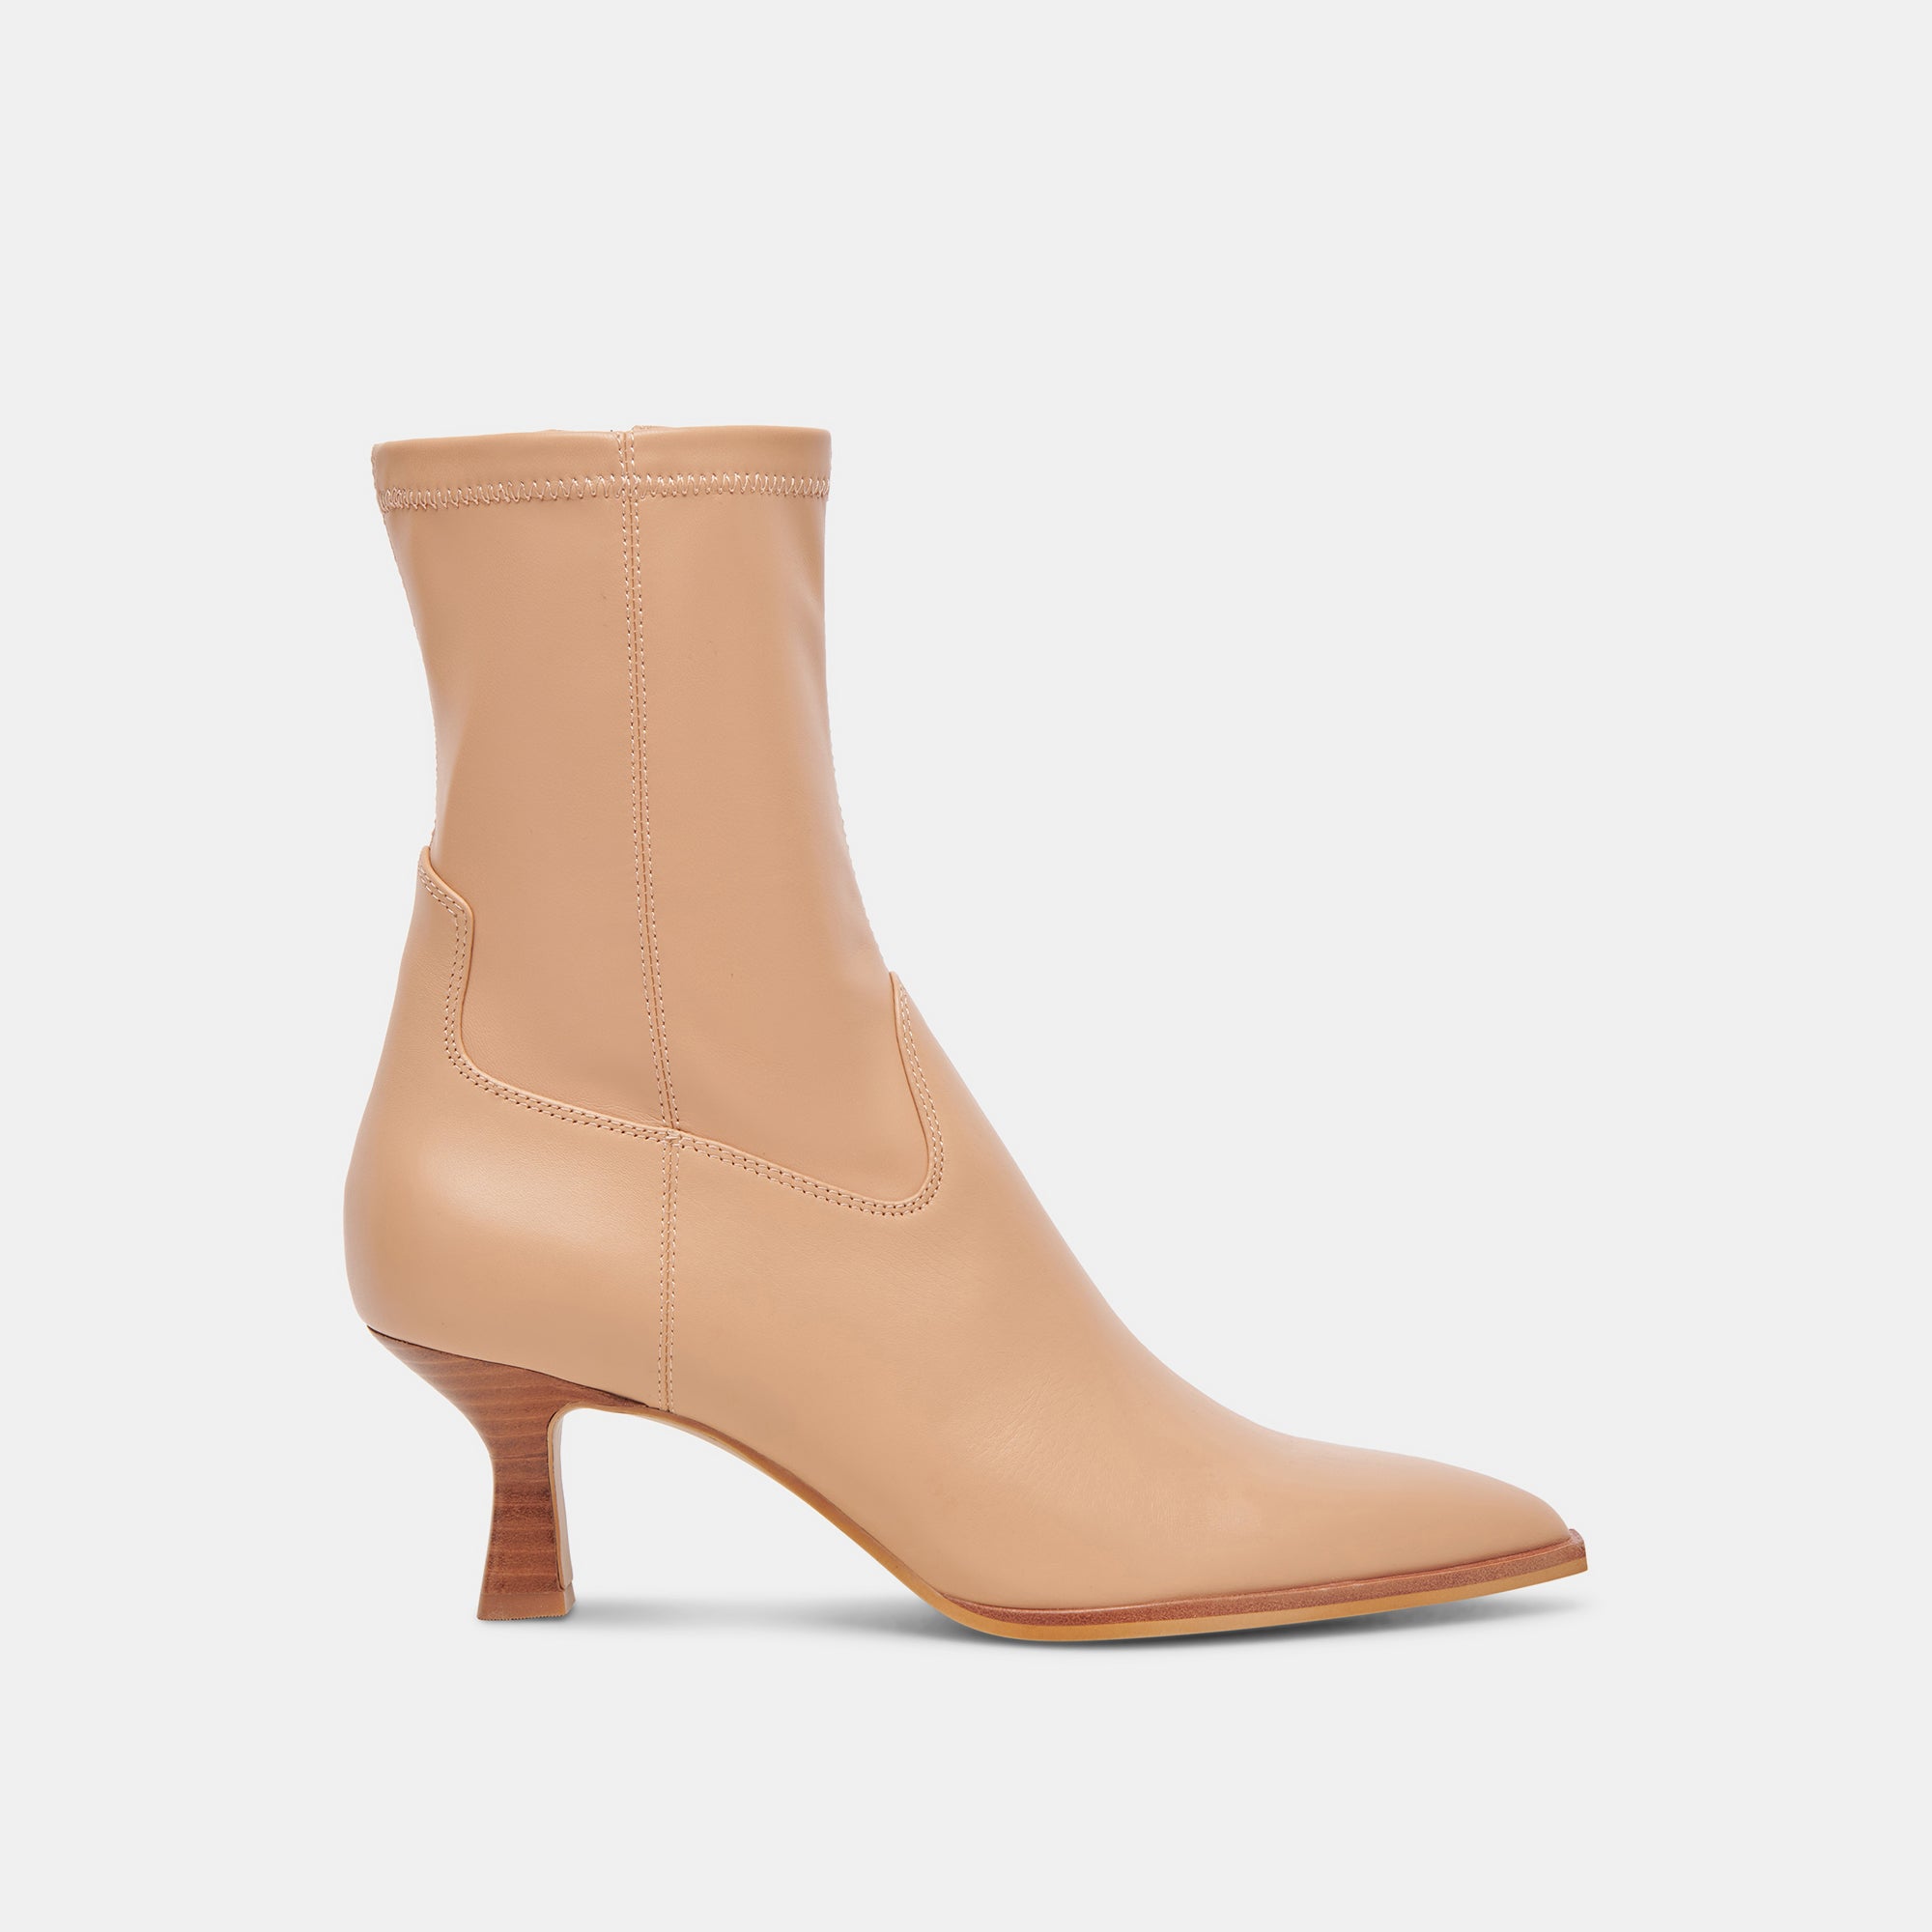 Beige knit heeled ankle boots | River Island